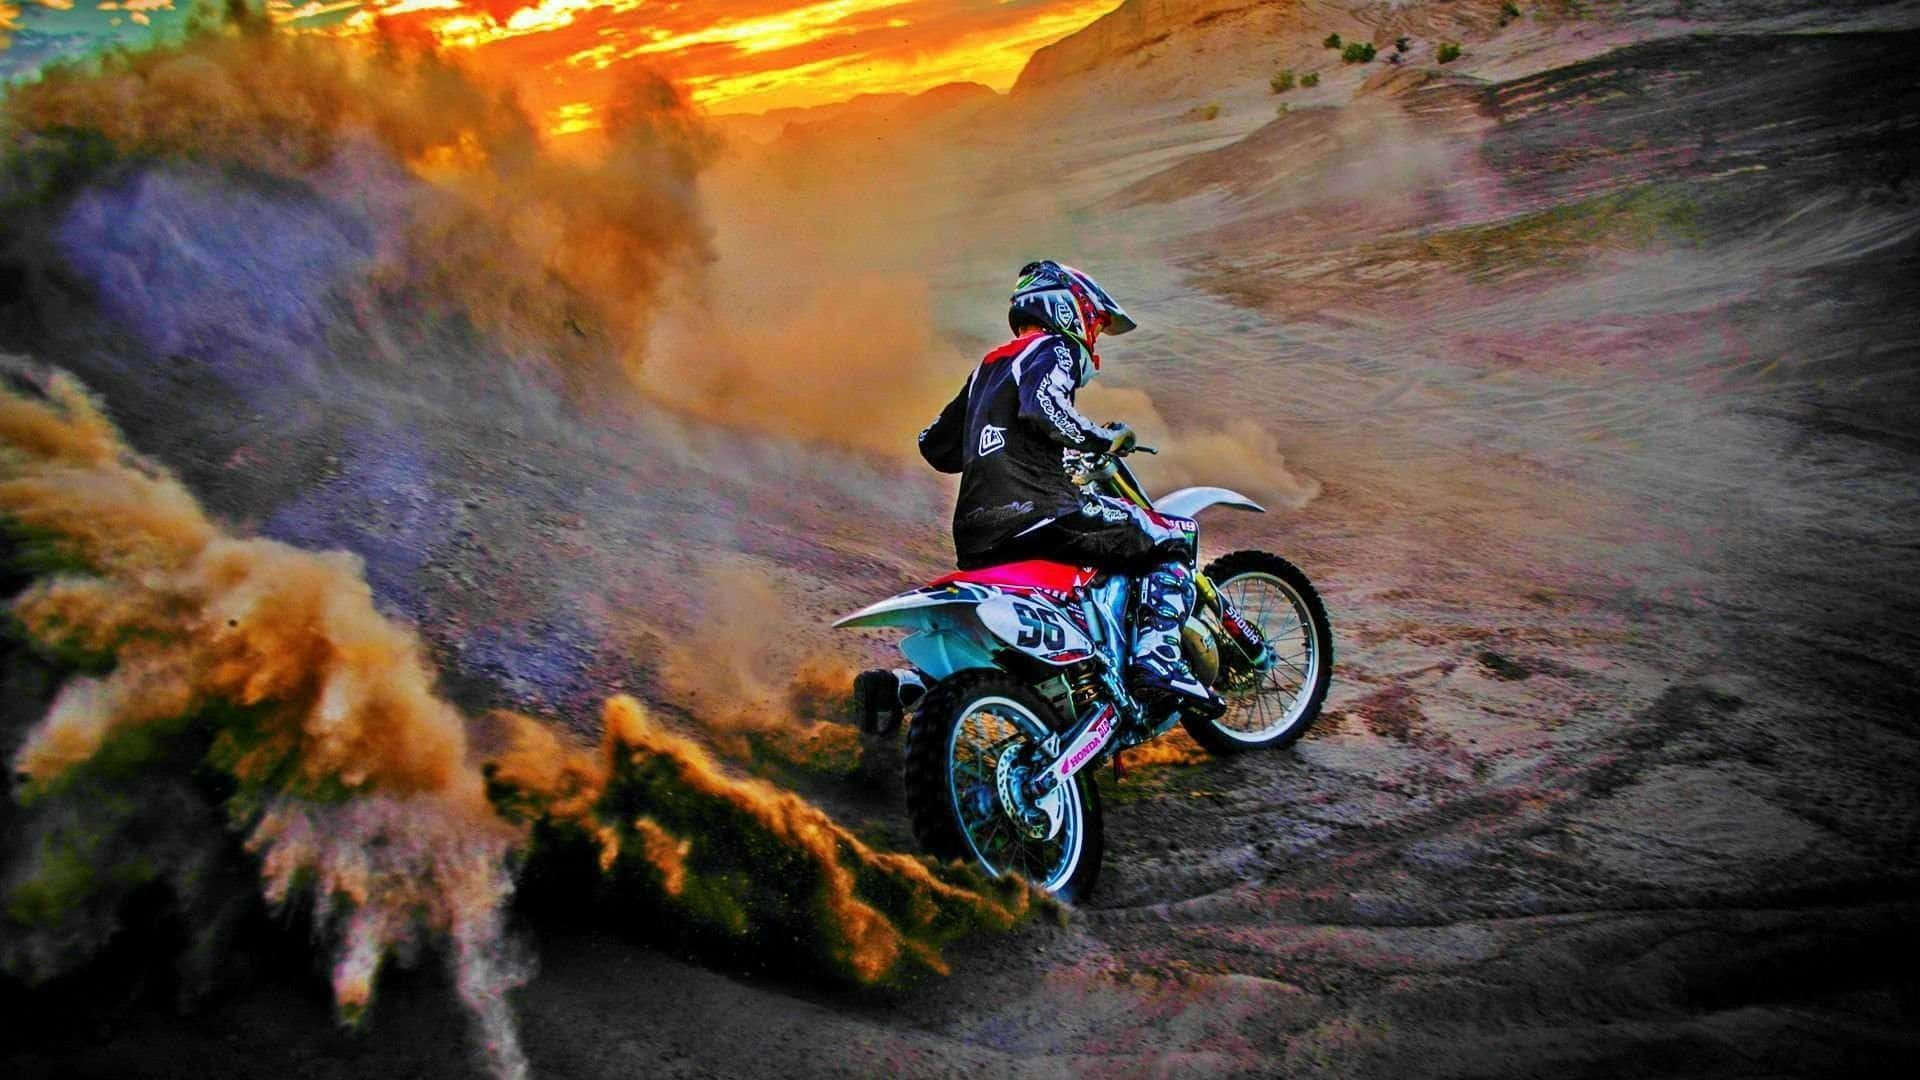 Professional dirt bike rider catching air on a thrilling outdoor track